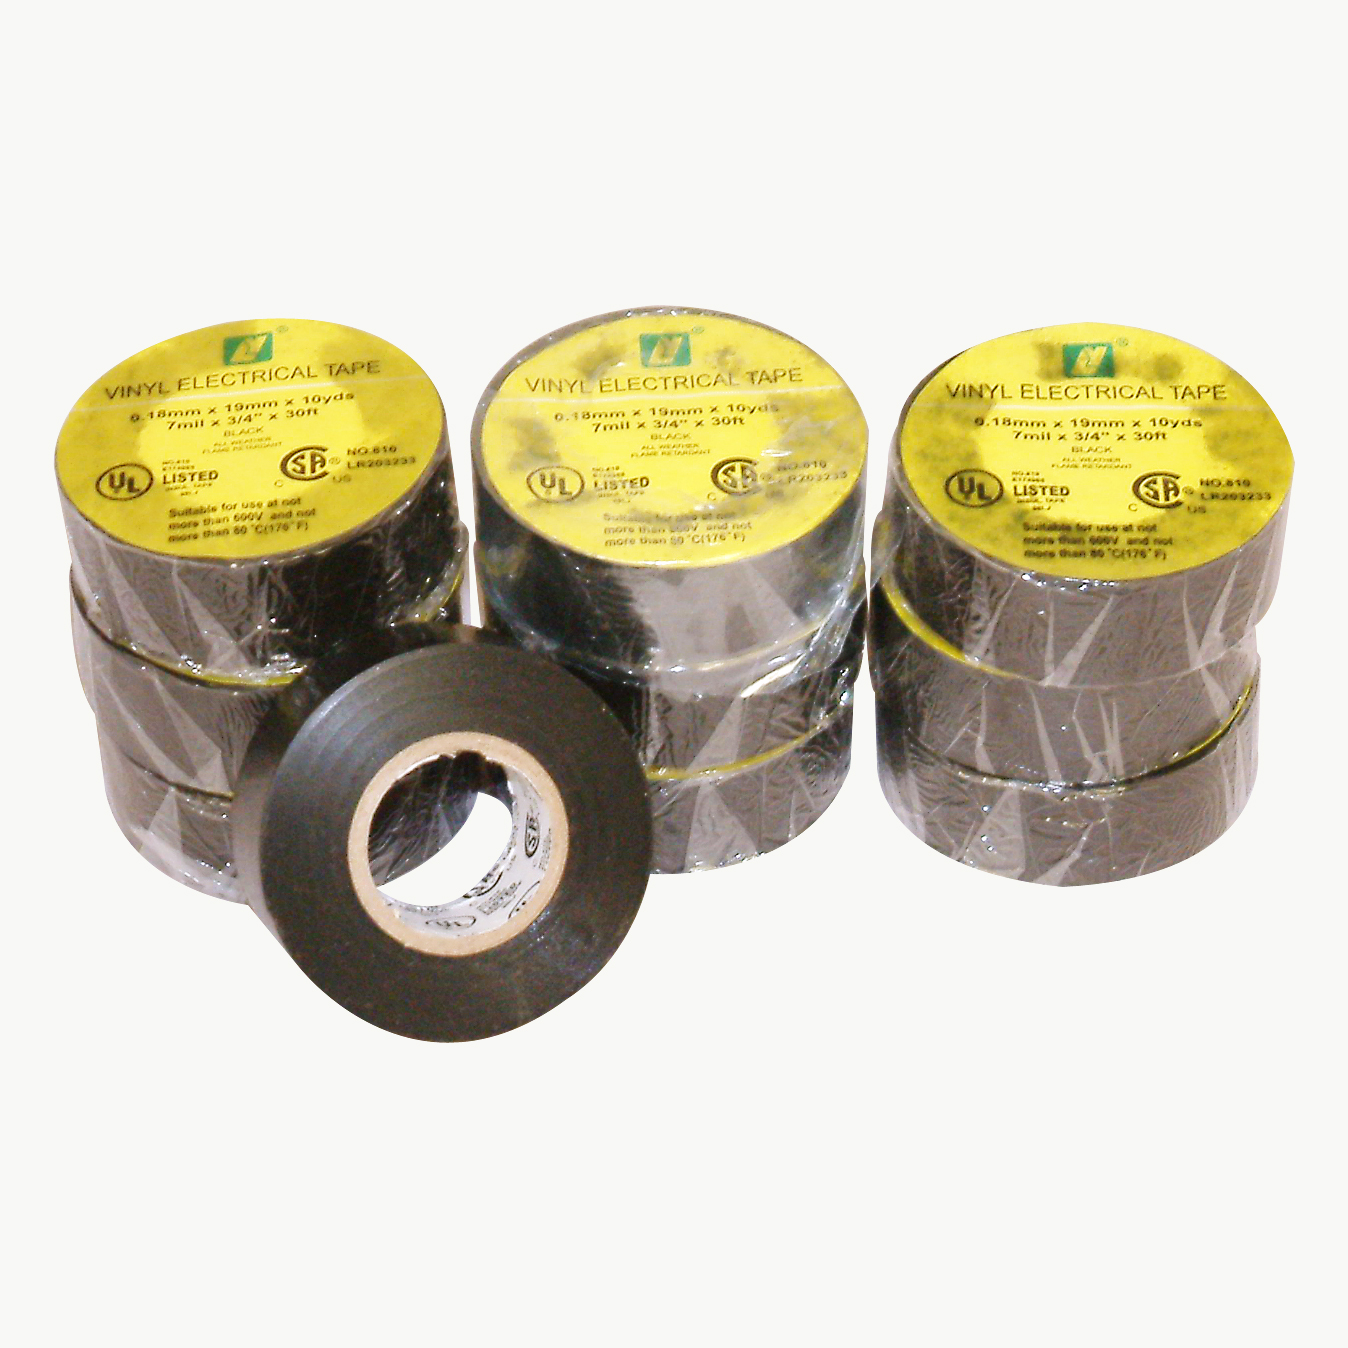 Pink JVCC E-Tape Colored Electrical Tape x 66 ft. 3/4 in 